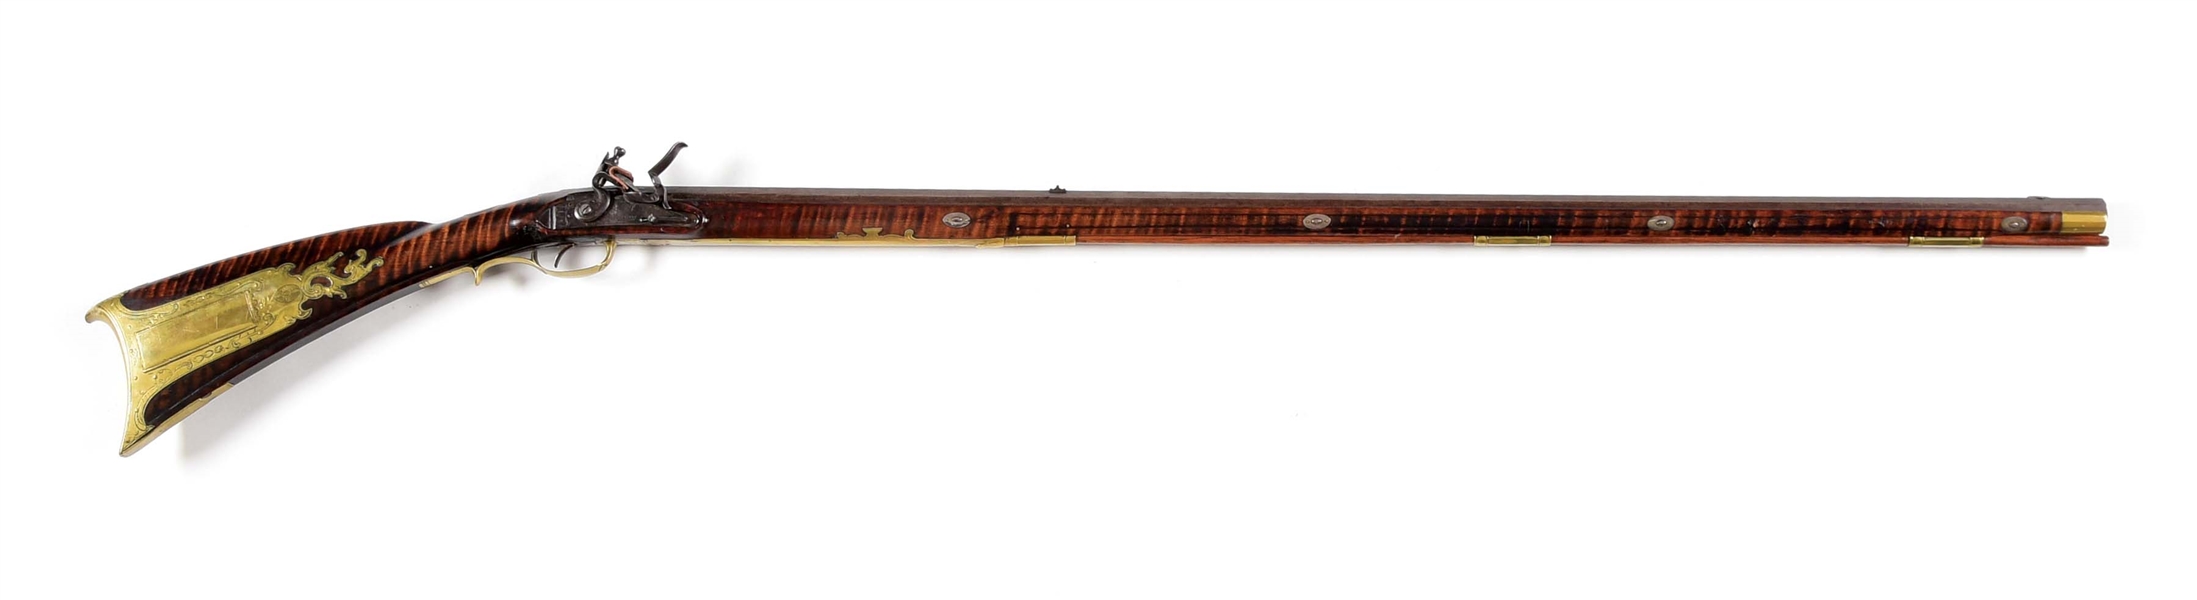 (A) FINE FLINTLOCK KENTUCKY LONGRIFLE ATTRIBUTED TO HENRY YOUNG.